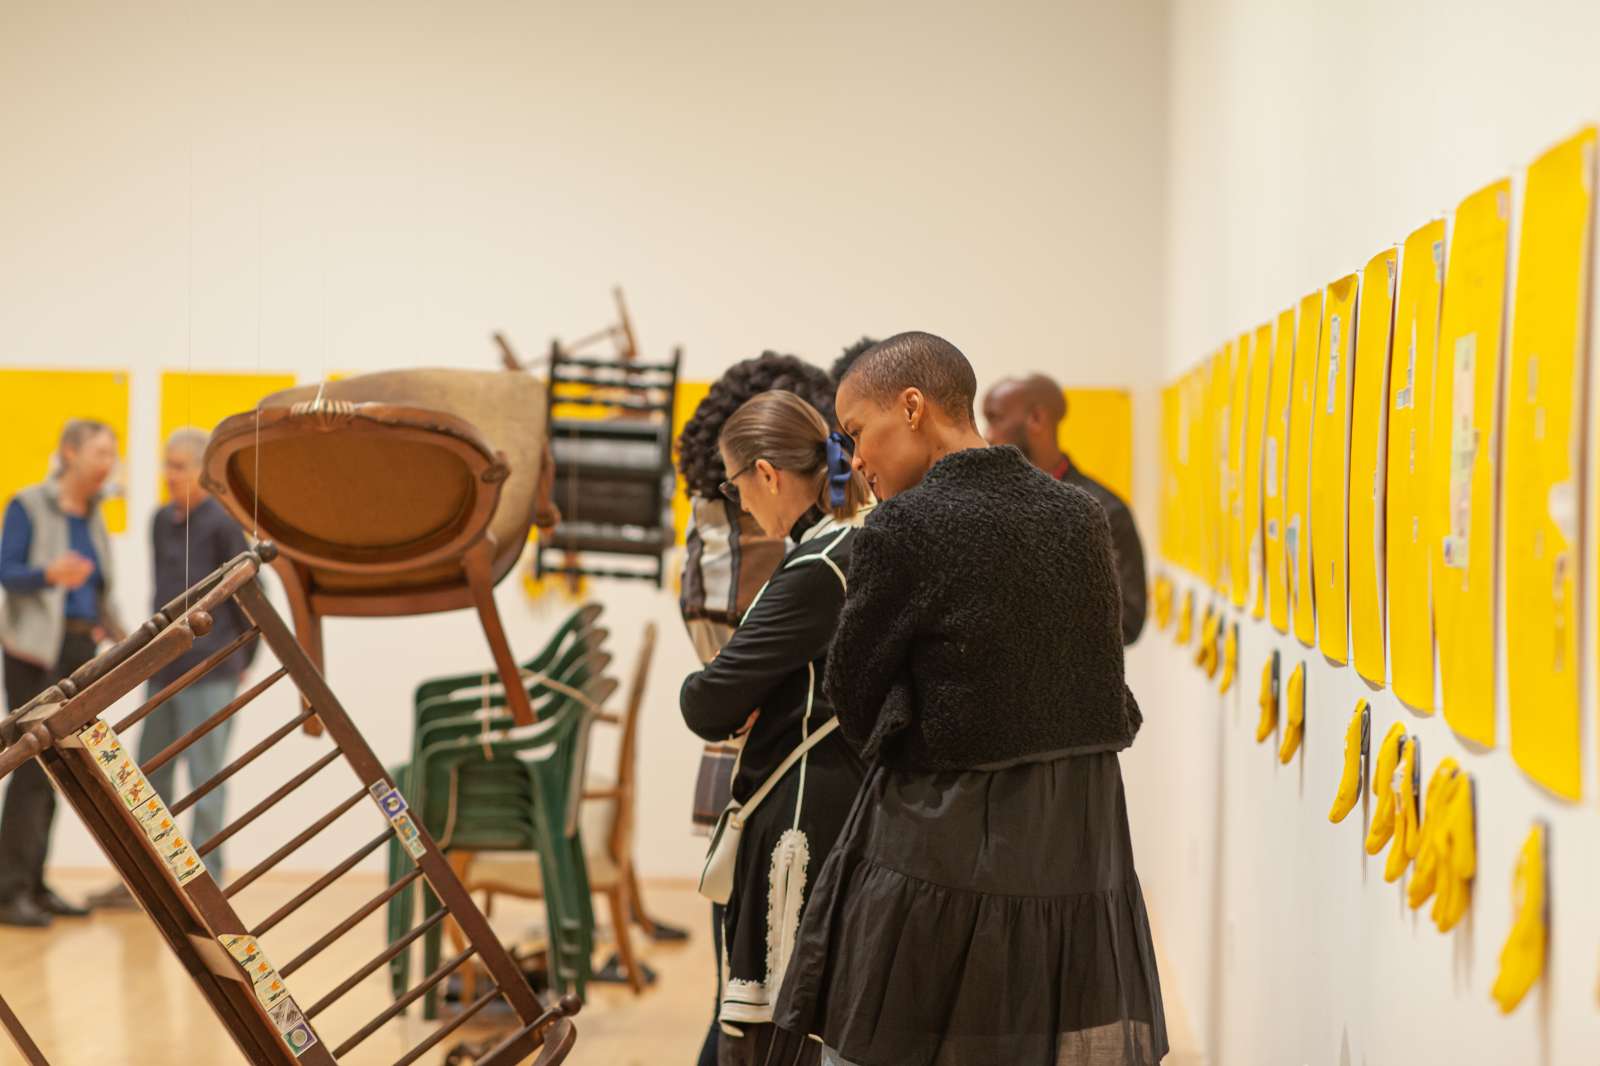 Serge Attukwei Clottey: Softening Borders, Moody Center for the Arts. Photo by Alyson Hunstman.